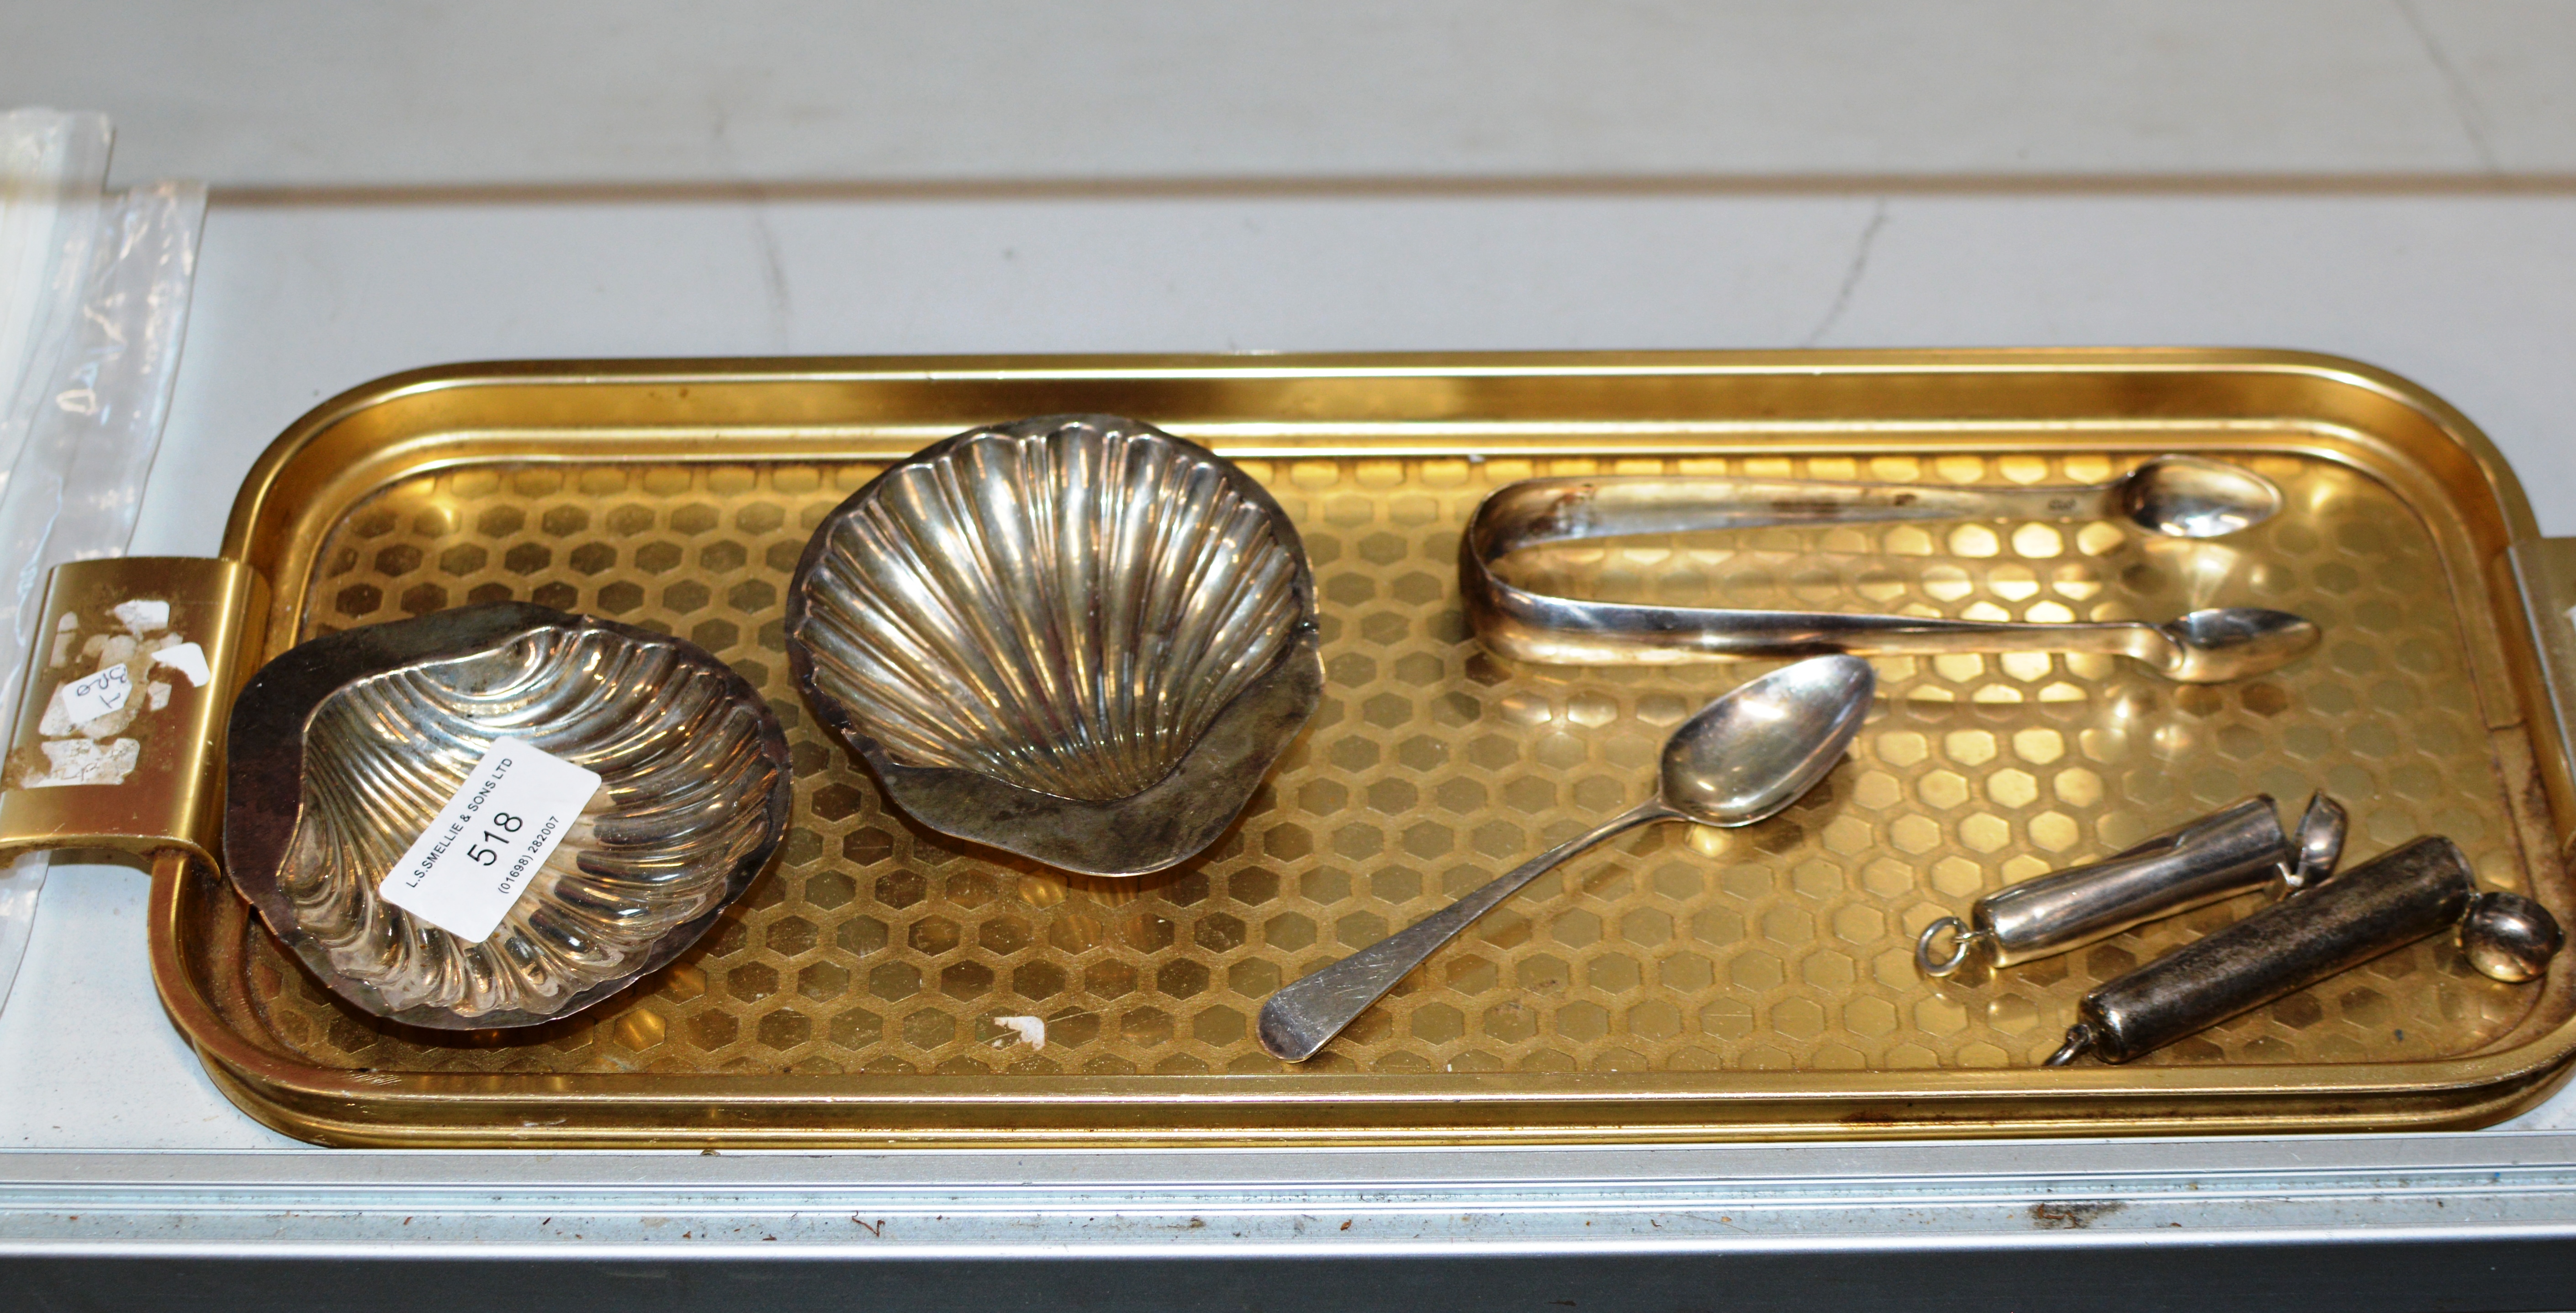 PAIR OF BIRMINGHAM SILVER SHELL DISHES, PAIR OF OLD SCOTTISH SILVER SUGAR TONGS, LONDON SILVER